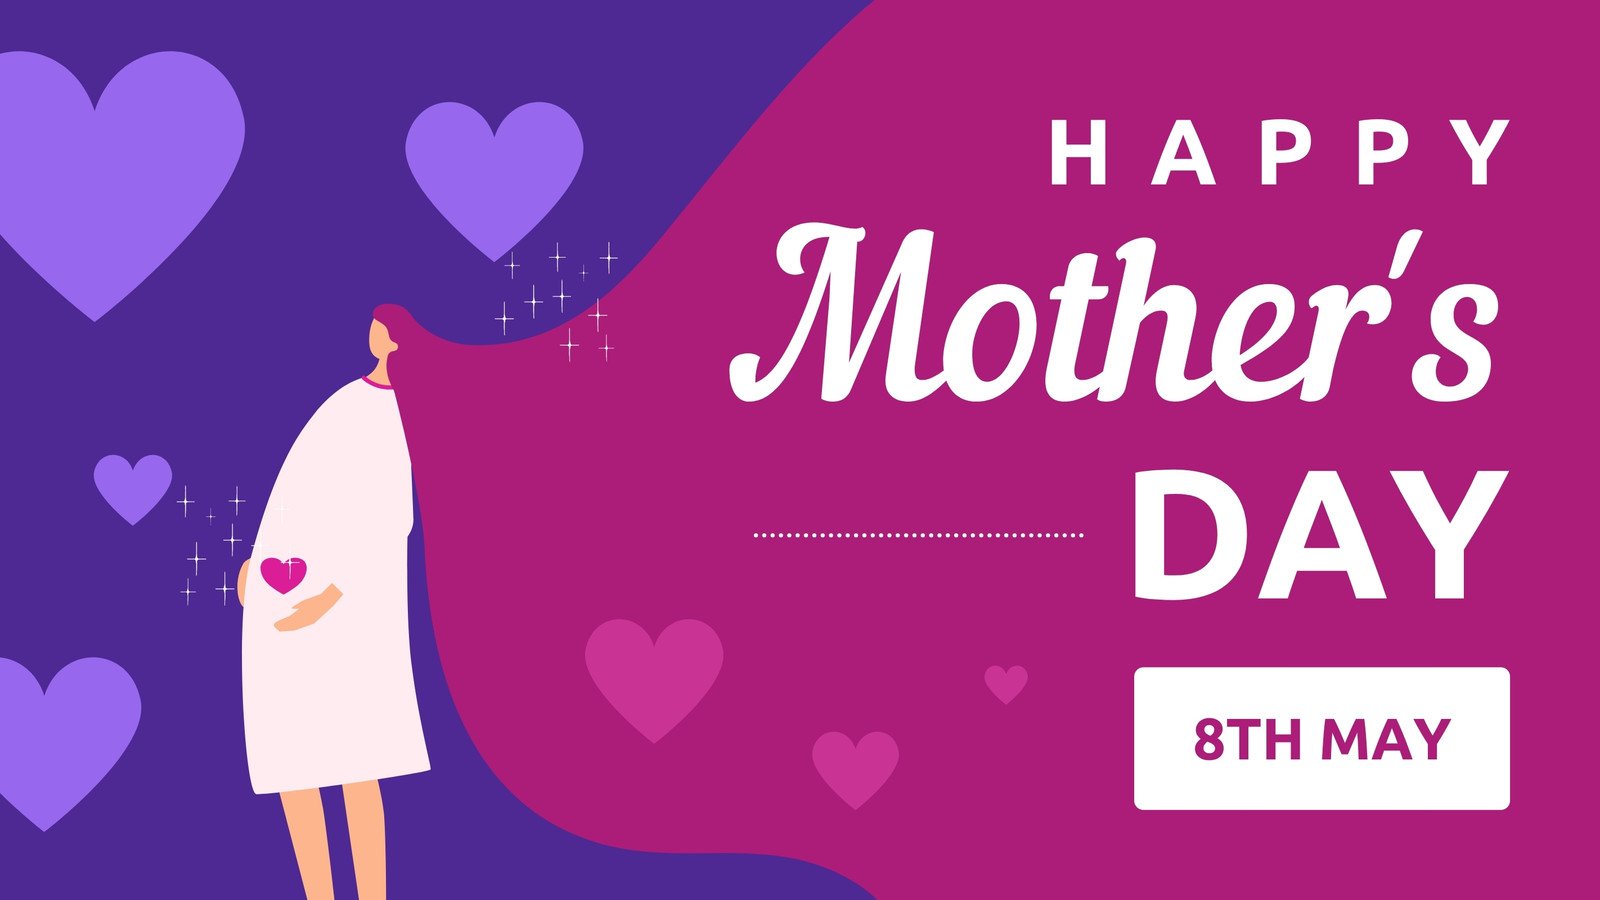 Free and customizable Mother's Day video templates | Canva